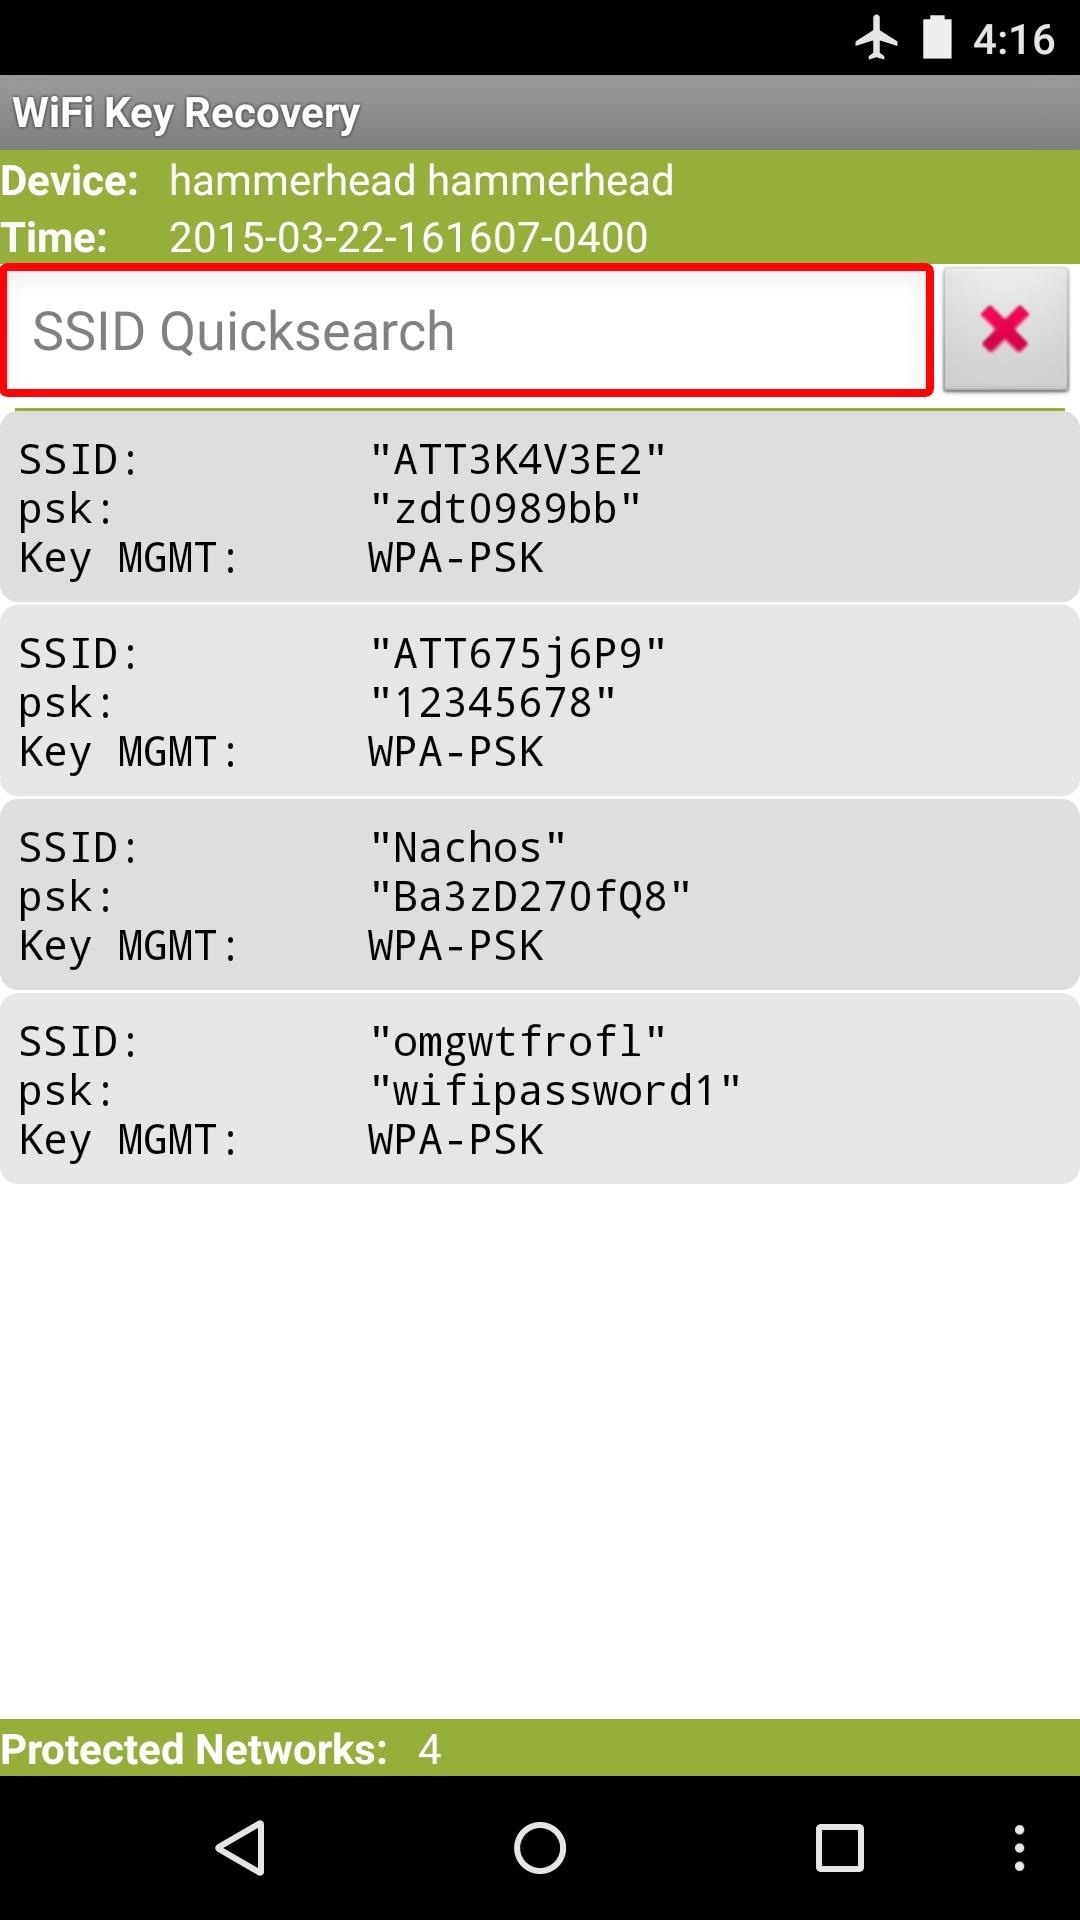 SSID Quicksearch